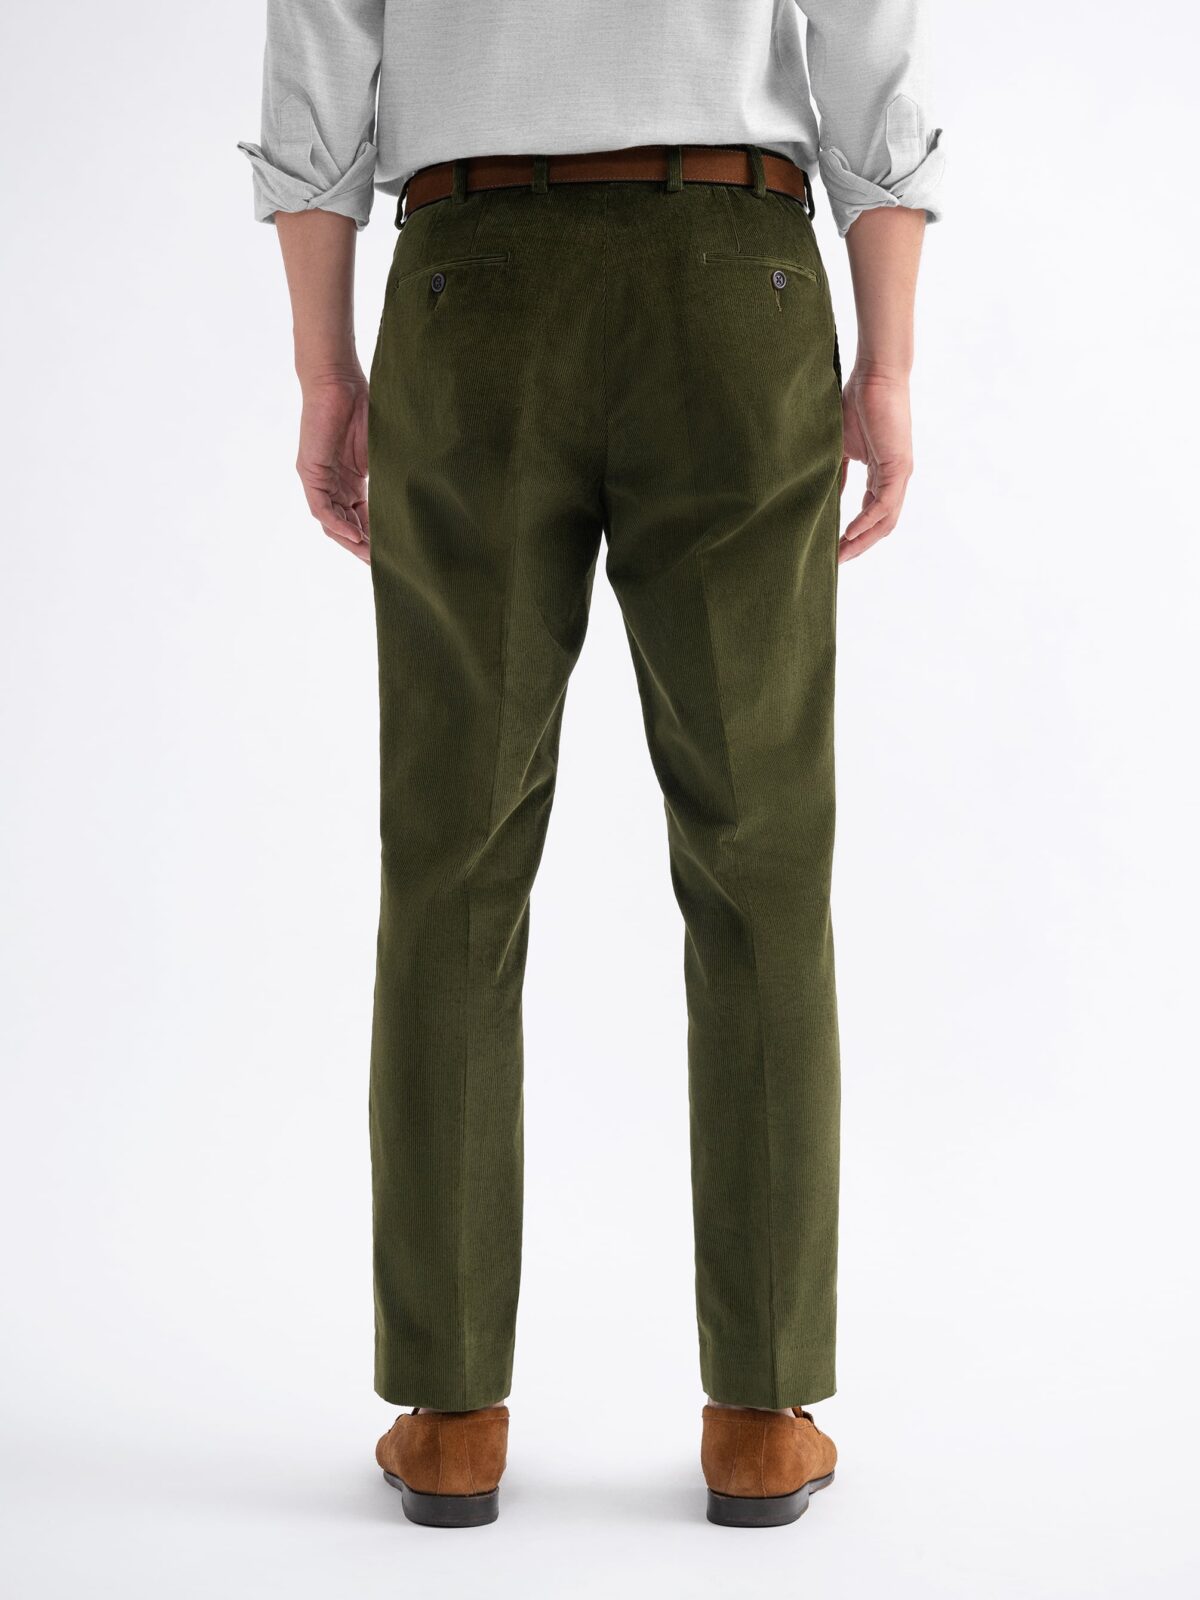 It's Cool Olive Green High Waisted Trouser Pants | High waisted trouser  pants, High waisted trousers, Green trousers